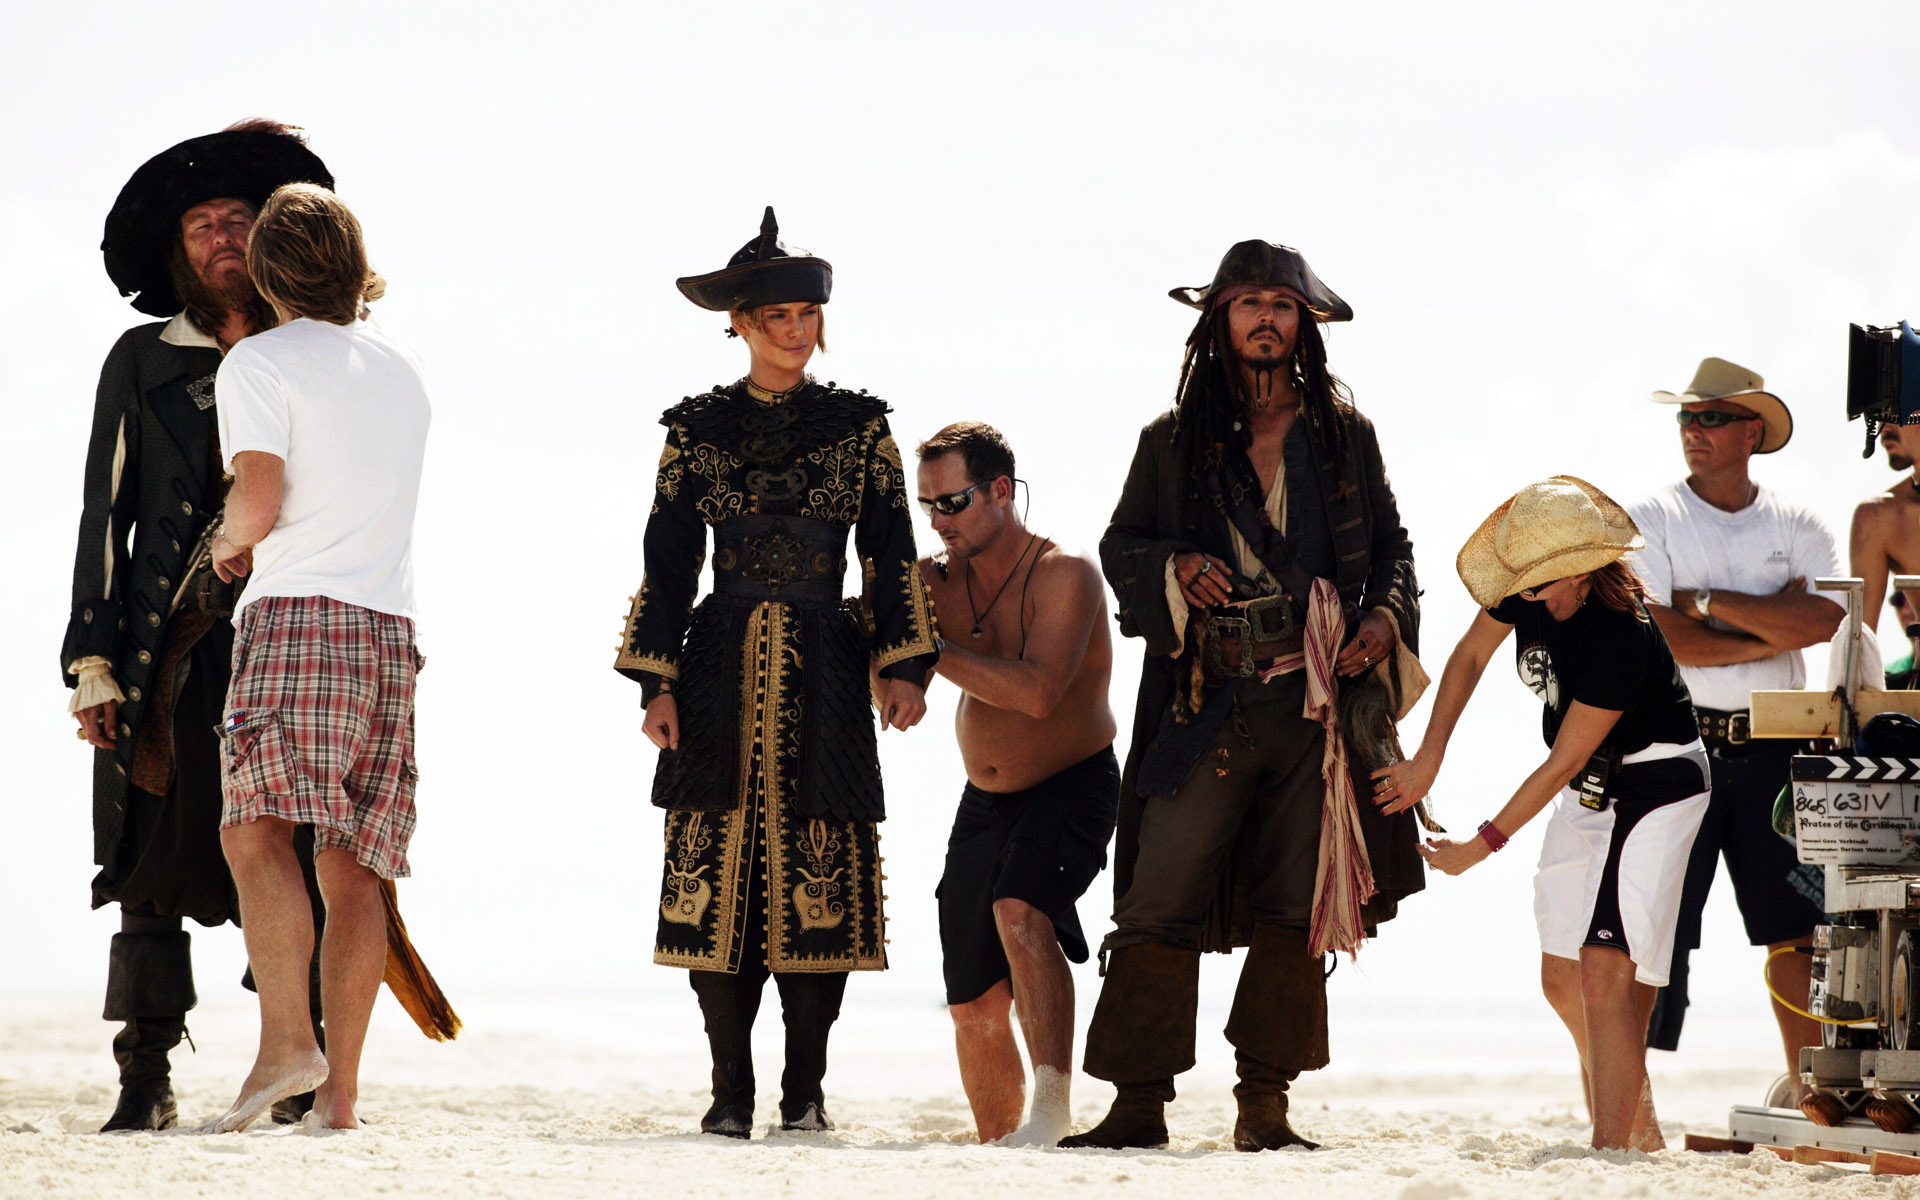 movie, pirates of the caribbean: at world's end, elizabeth swann, geoffrey rush, hector barbossa, jack sparrow, johnny depp, keira knightley, pirates of the caribbean